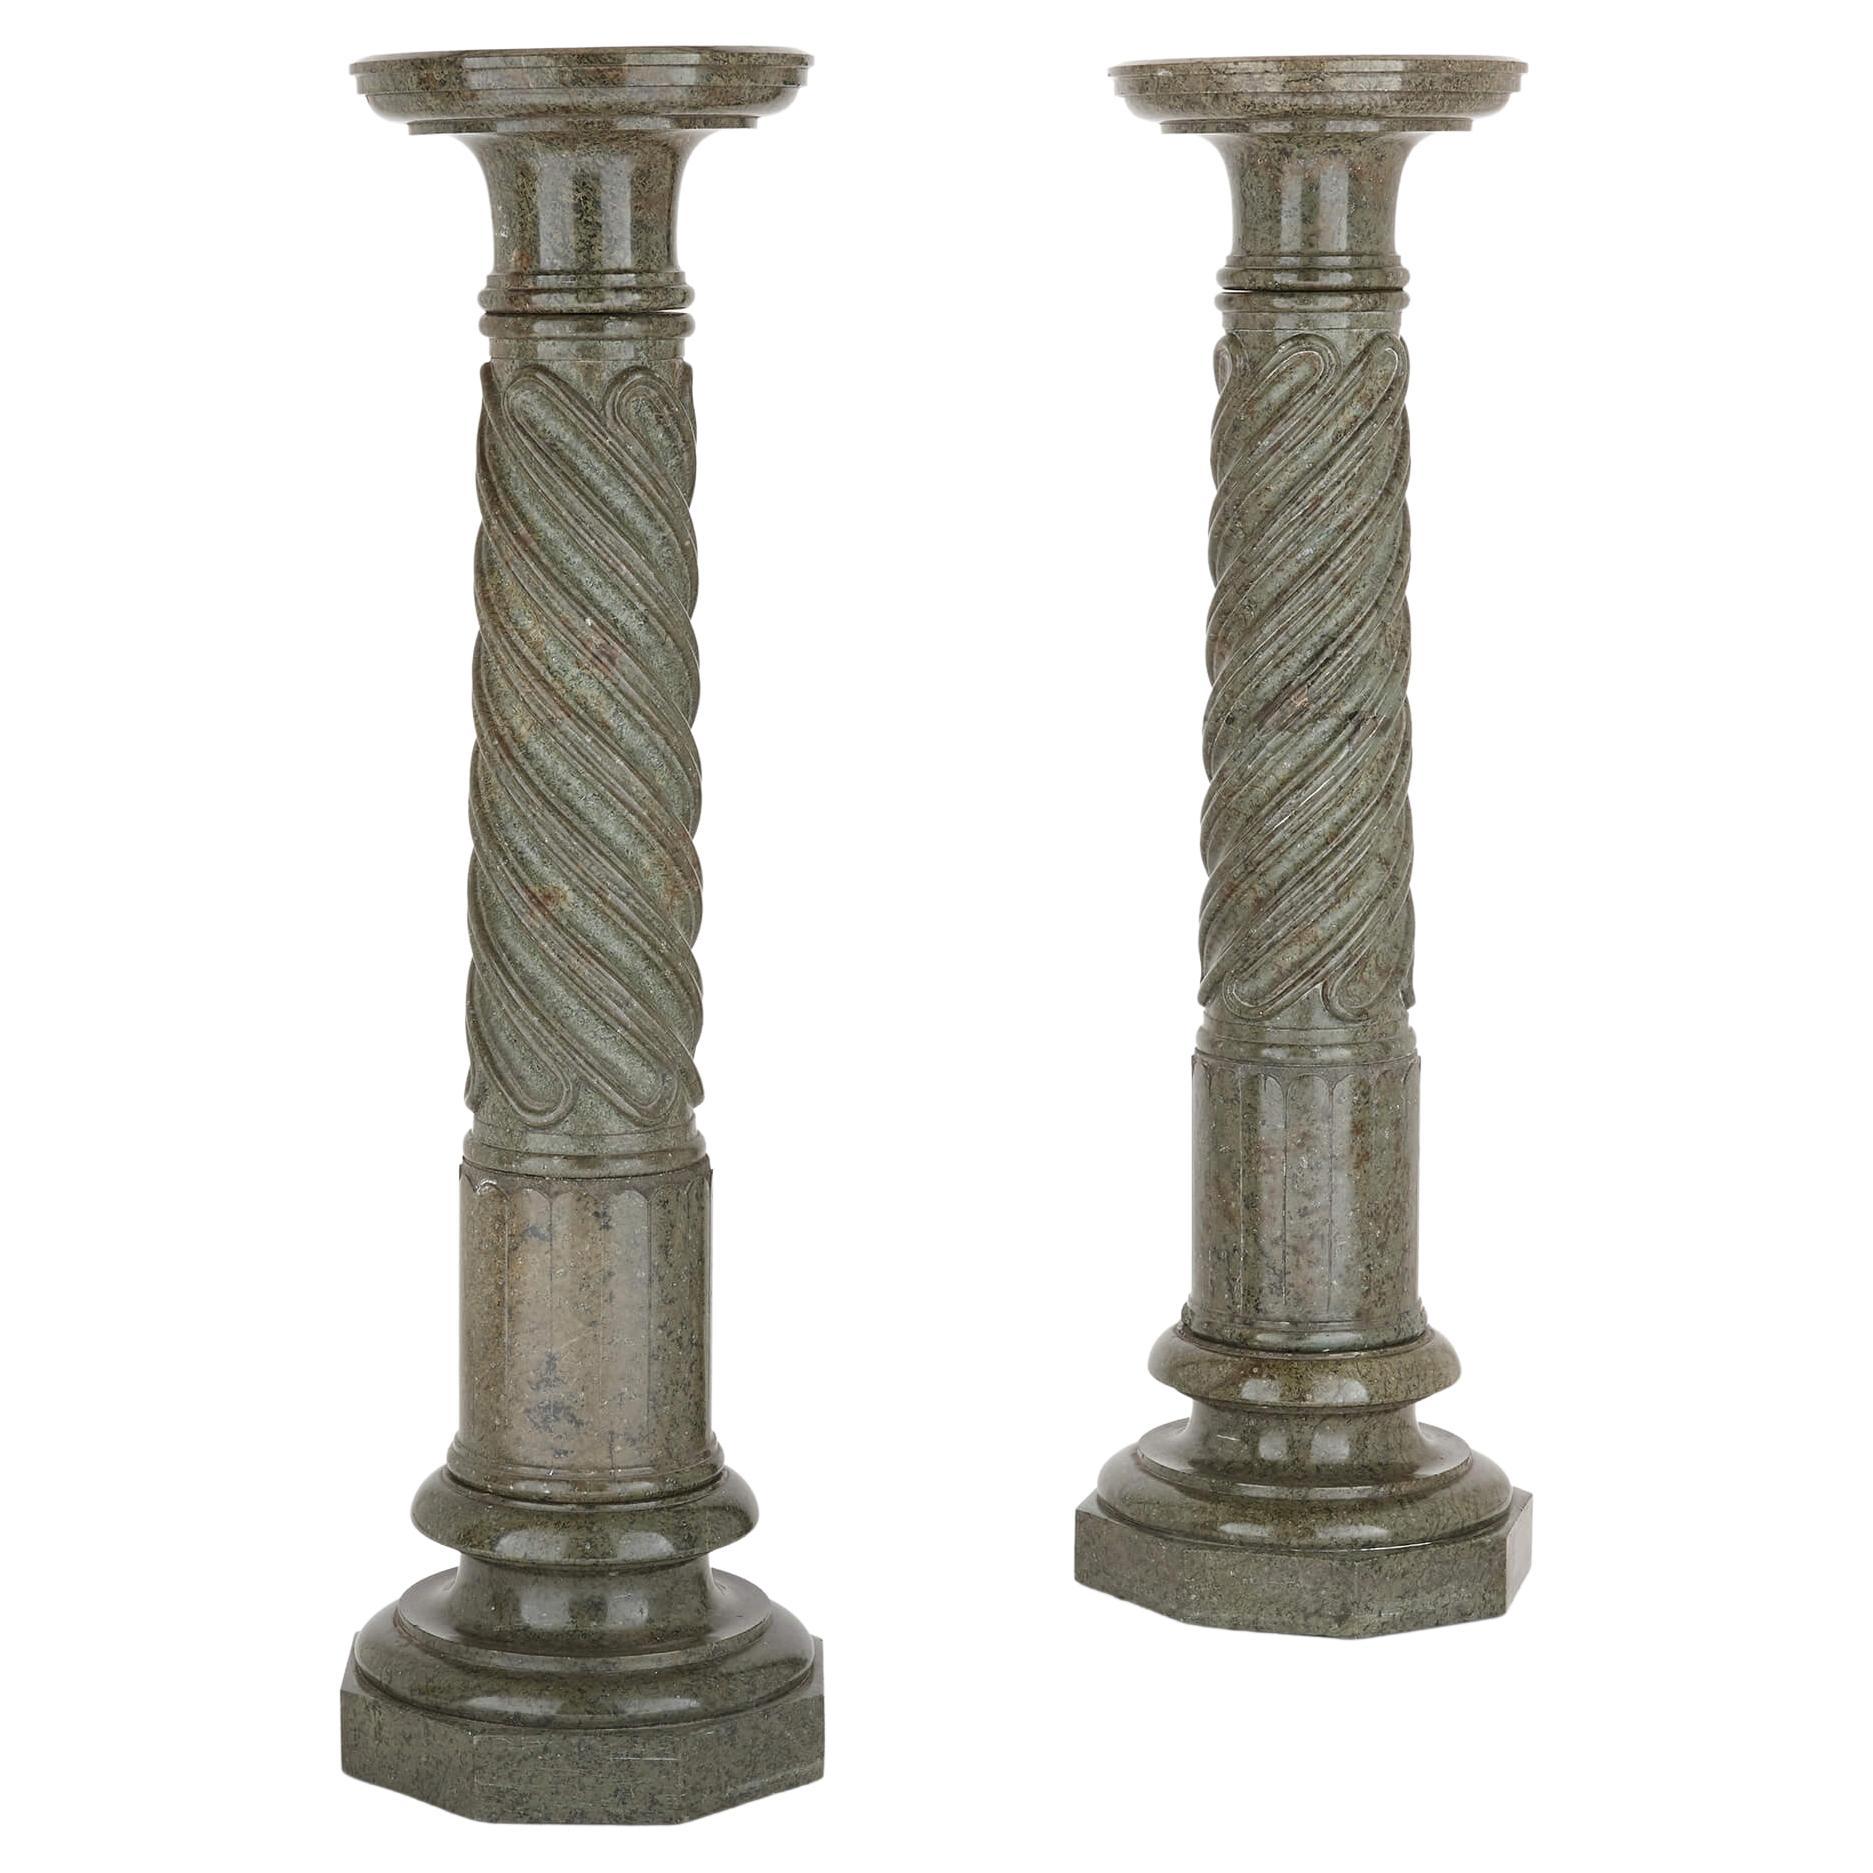 Pair of antique French marble column pedestals